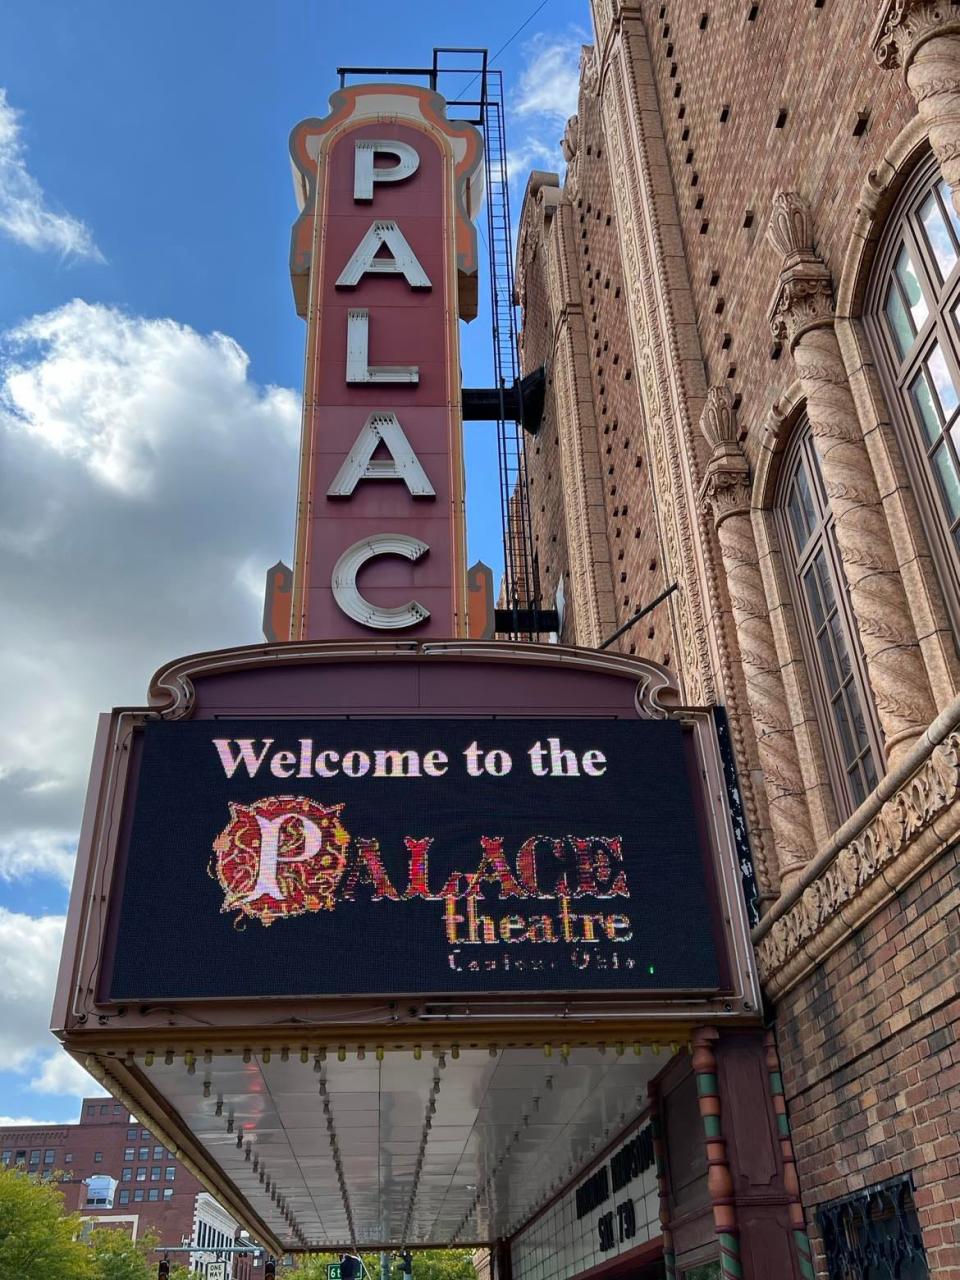 The Canton Palace Theatre announced a capital campaign to help fund a $16 million renovation and expansion project of the historic venue. Plans call for unveiling the improvements in November 2026 to correspond with its 100th anniversary.